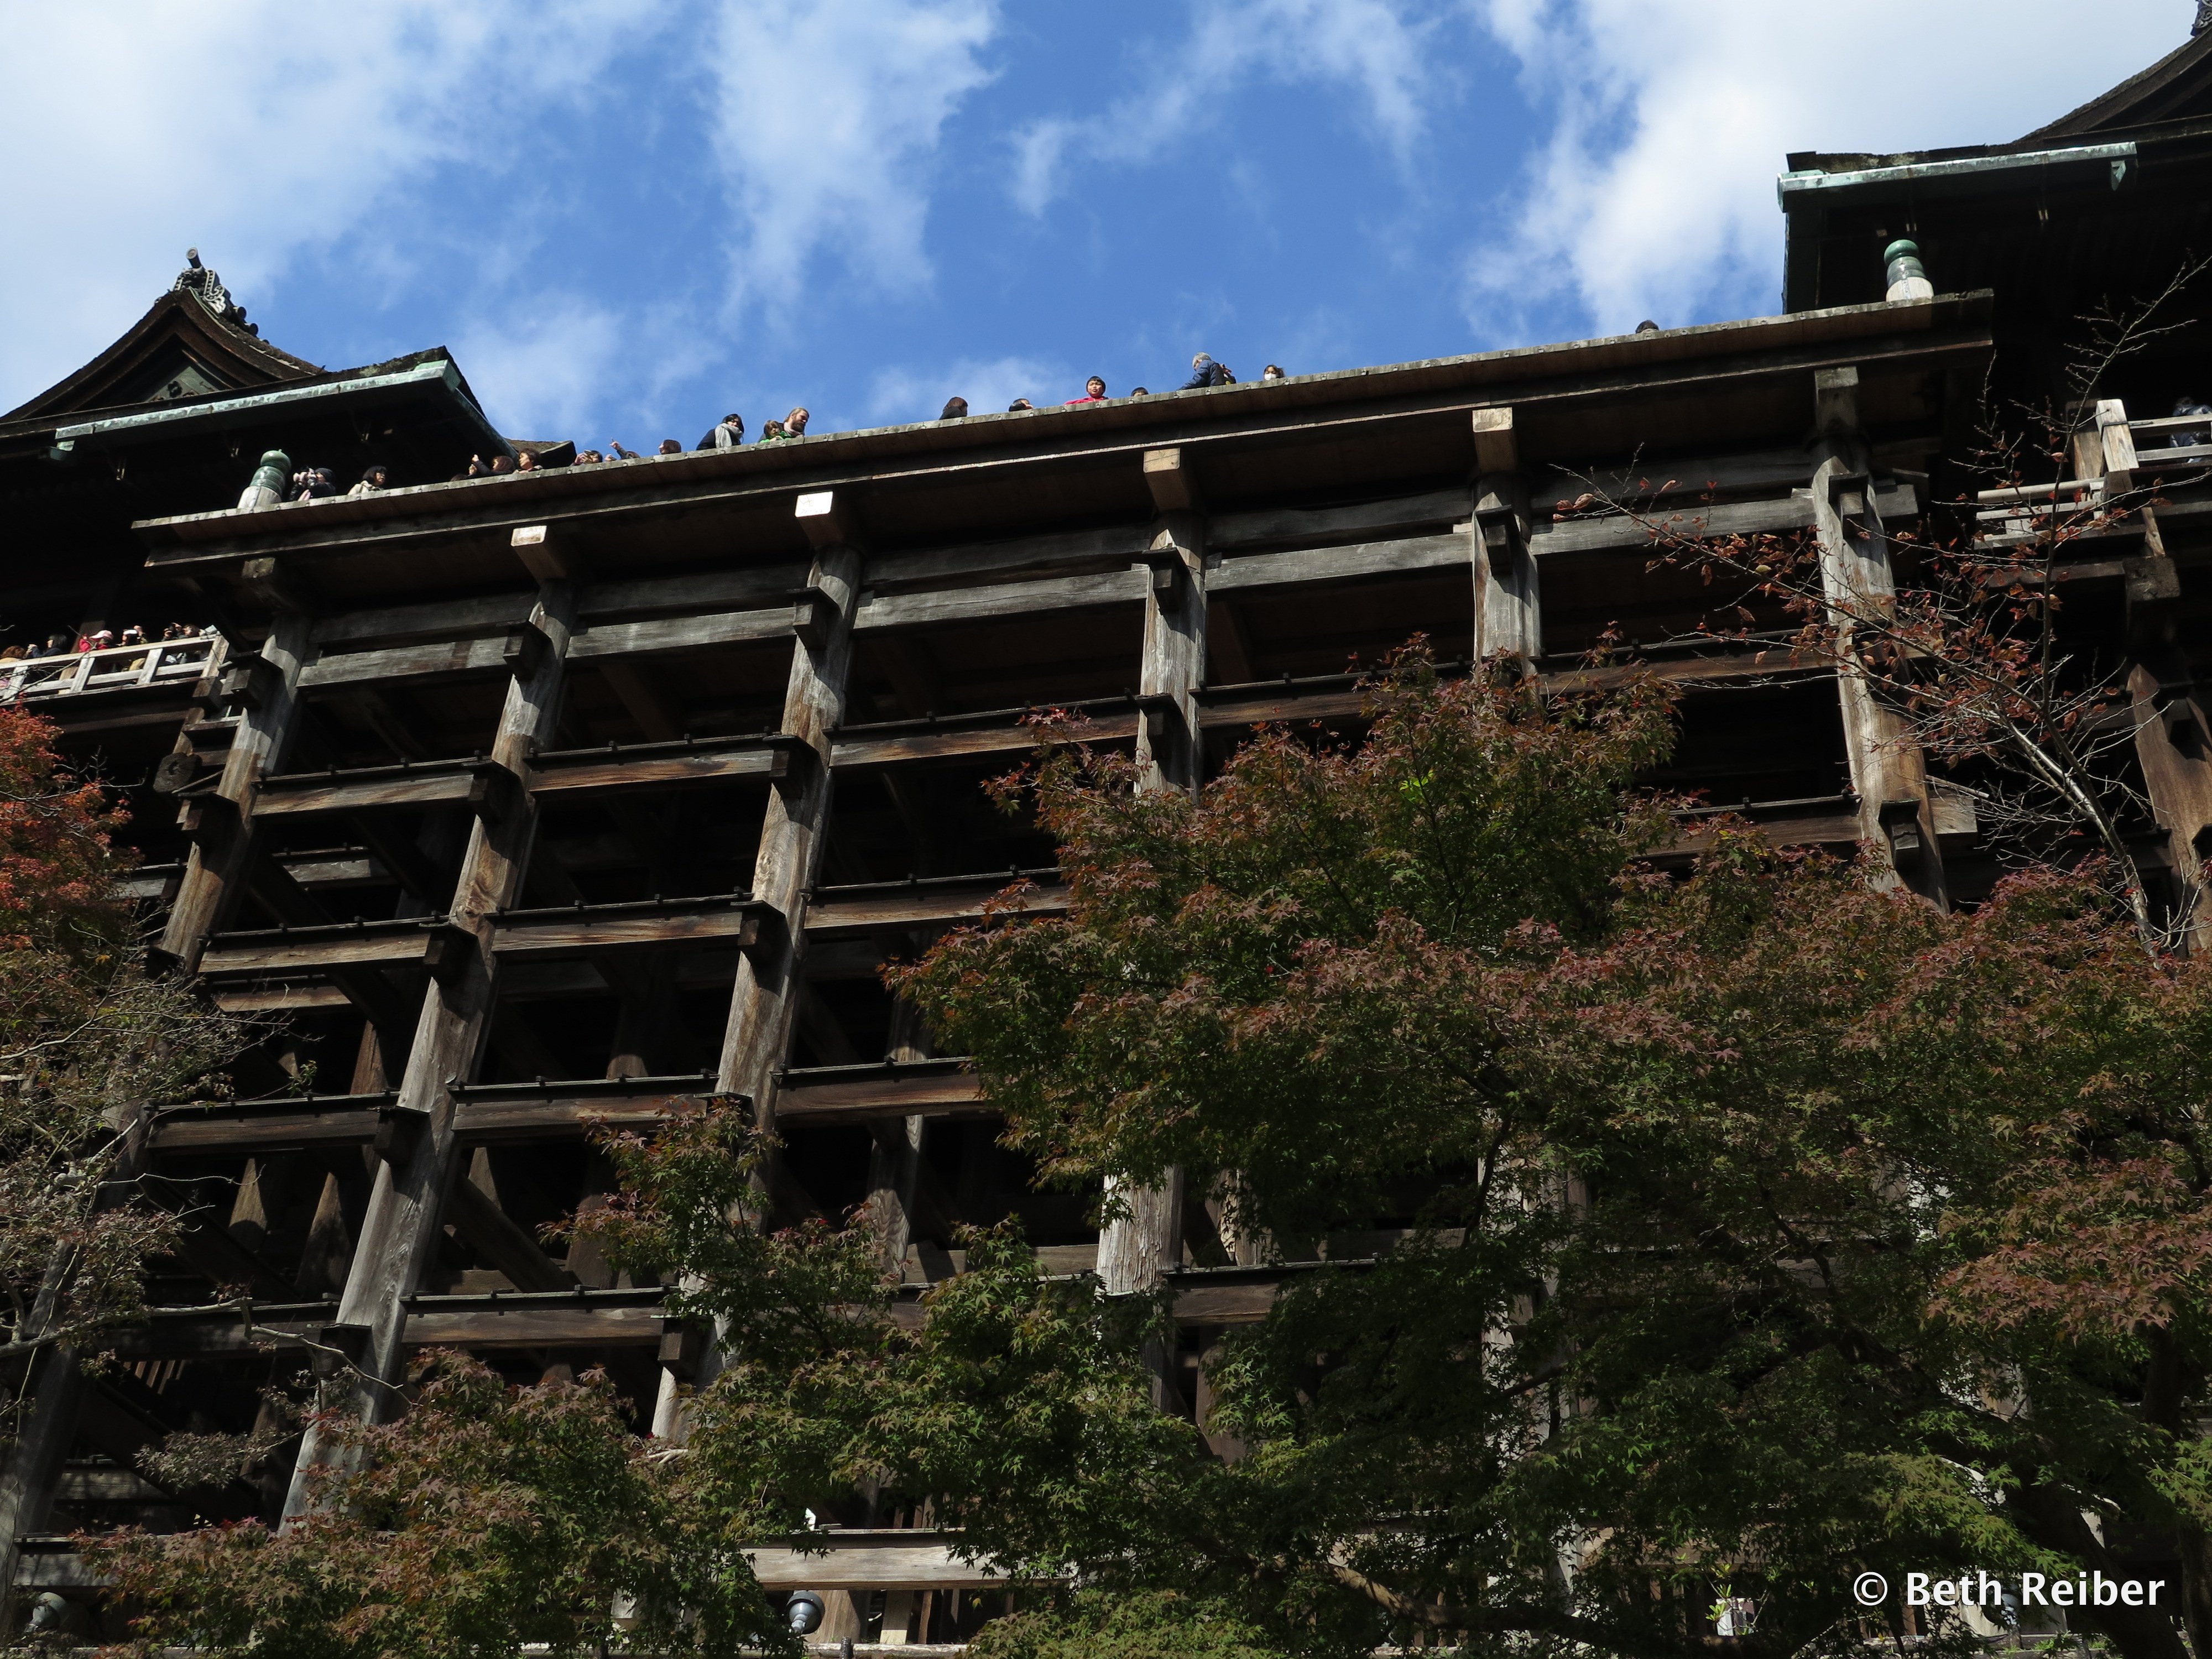 Kiyomizu Temple is one of Japan's top world heritage sites